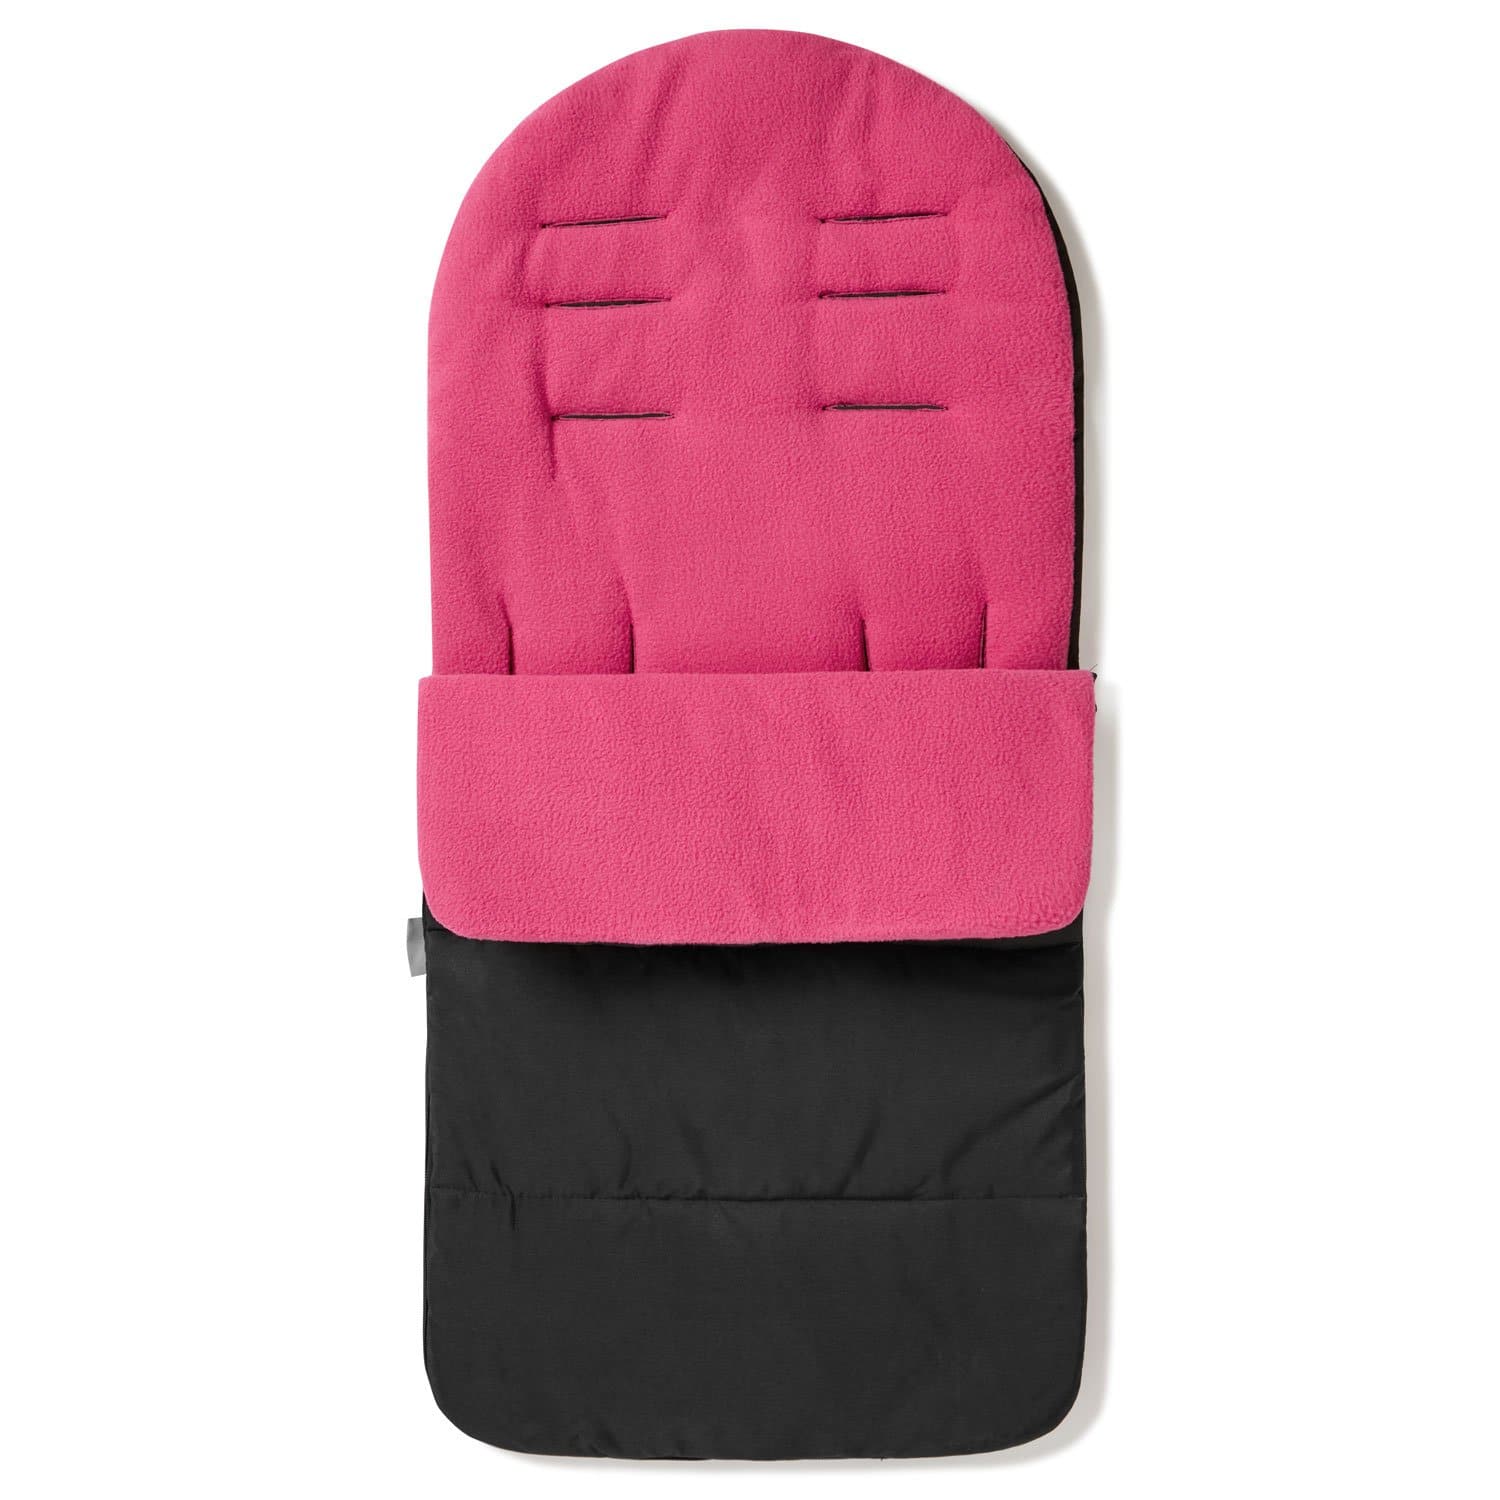 Premium Footmuff / Cosy Toes Compatible with Phil & Teds - Pink Rose / Fits All Models | For Your Little One